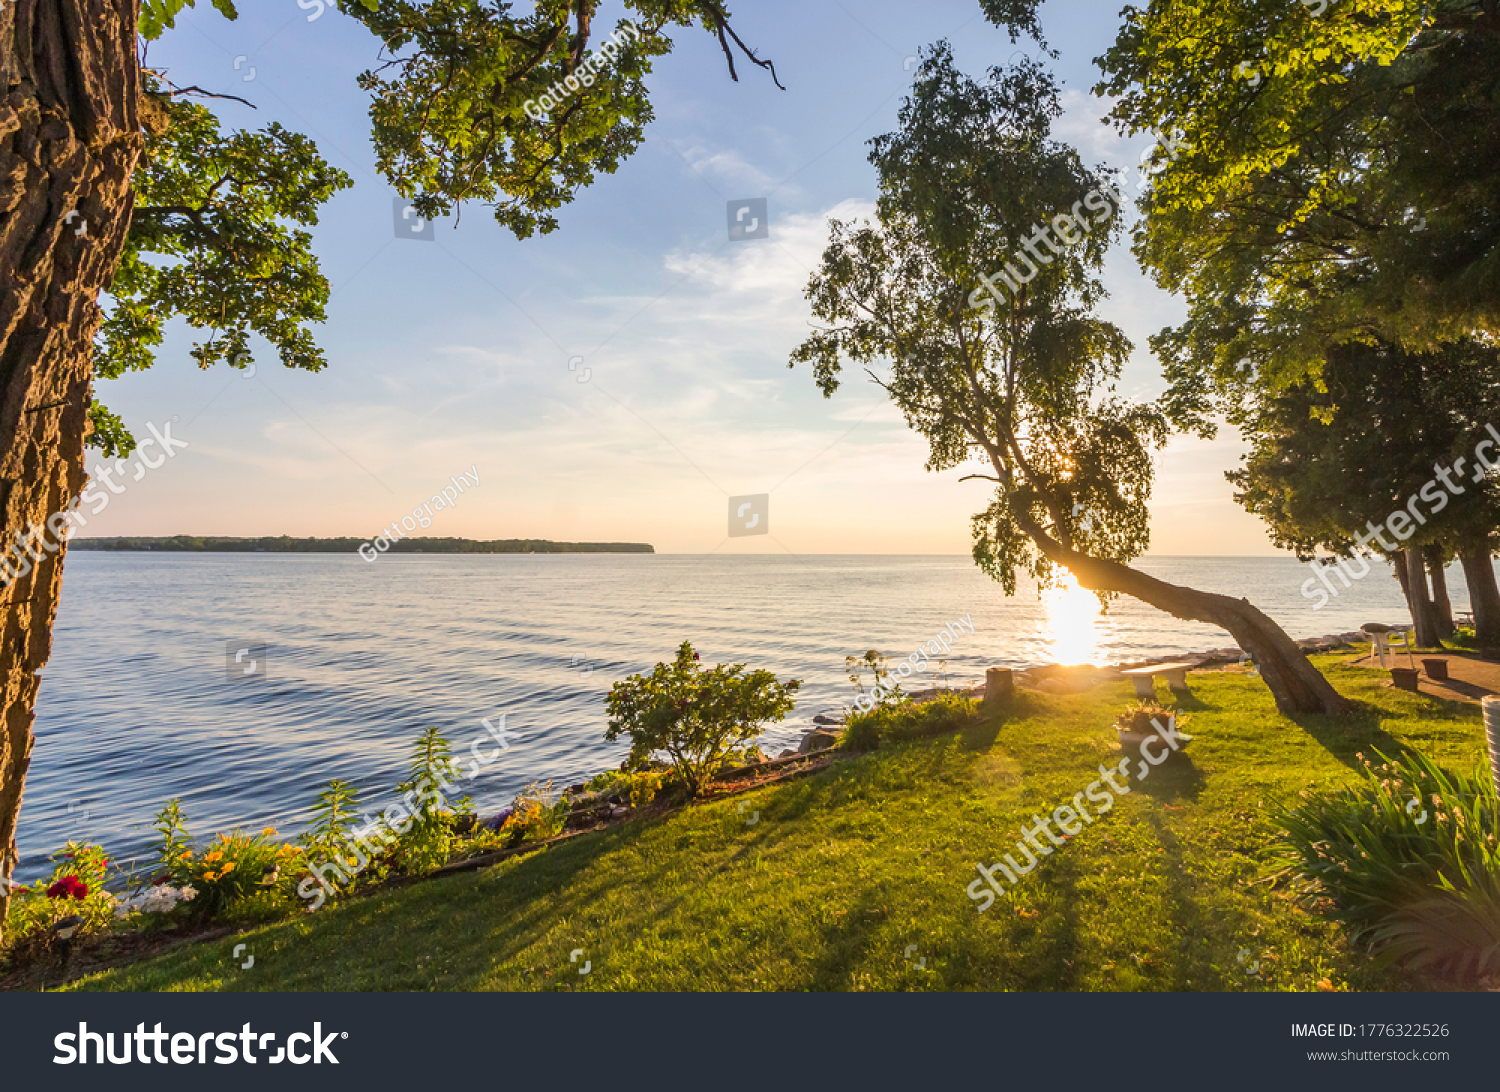 Sunset Over Lake Michigan and Garden Landscape #1776322526